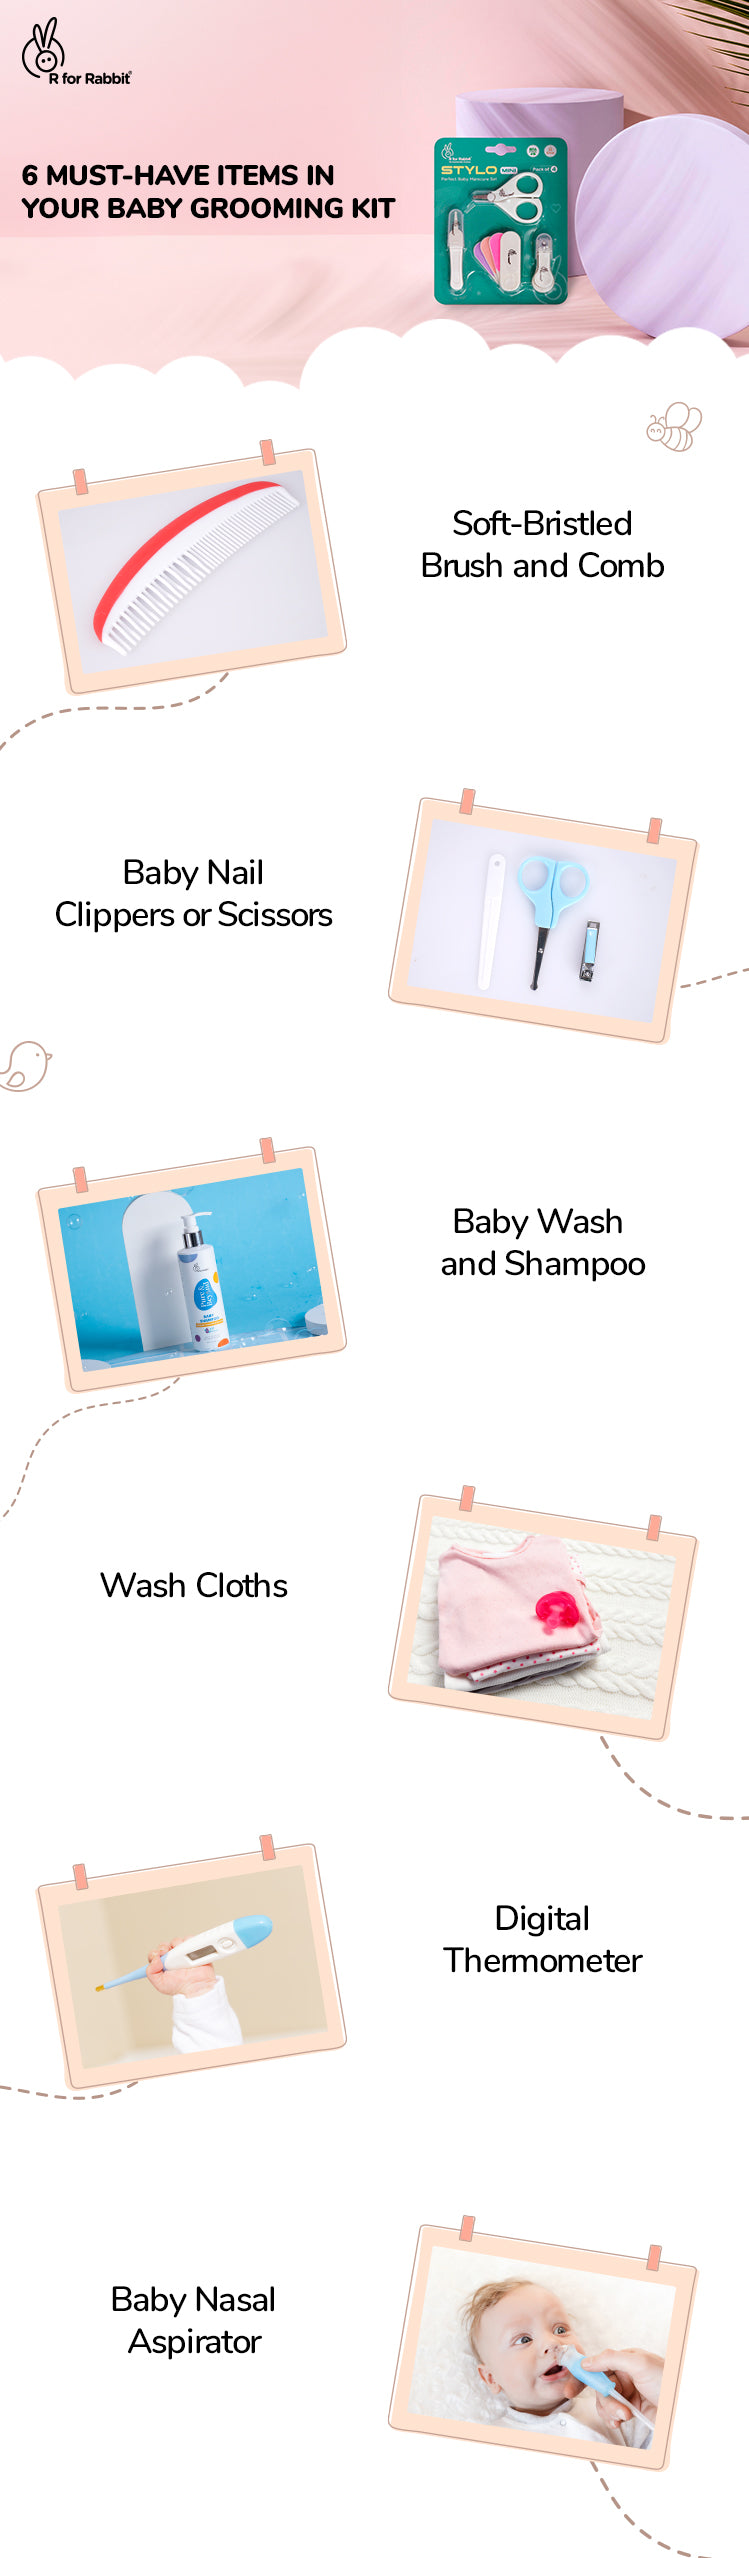 Essential Items For A Baby Grooming Kit